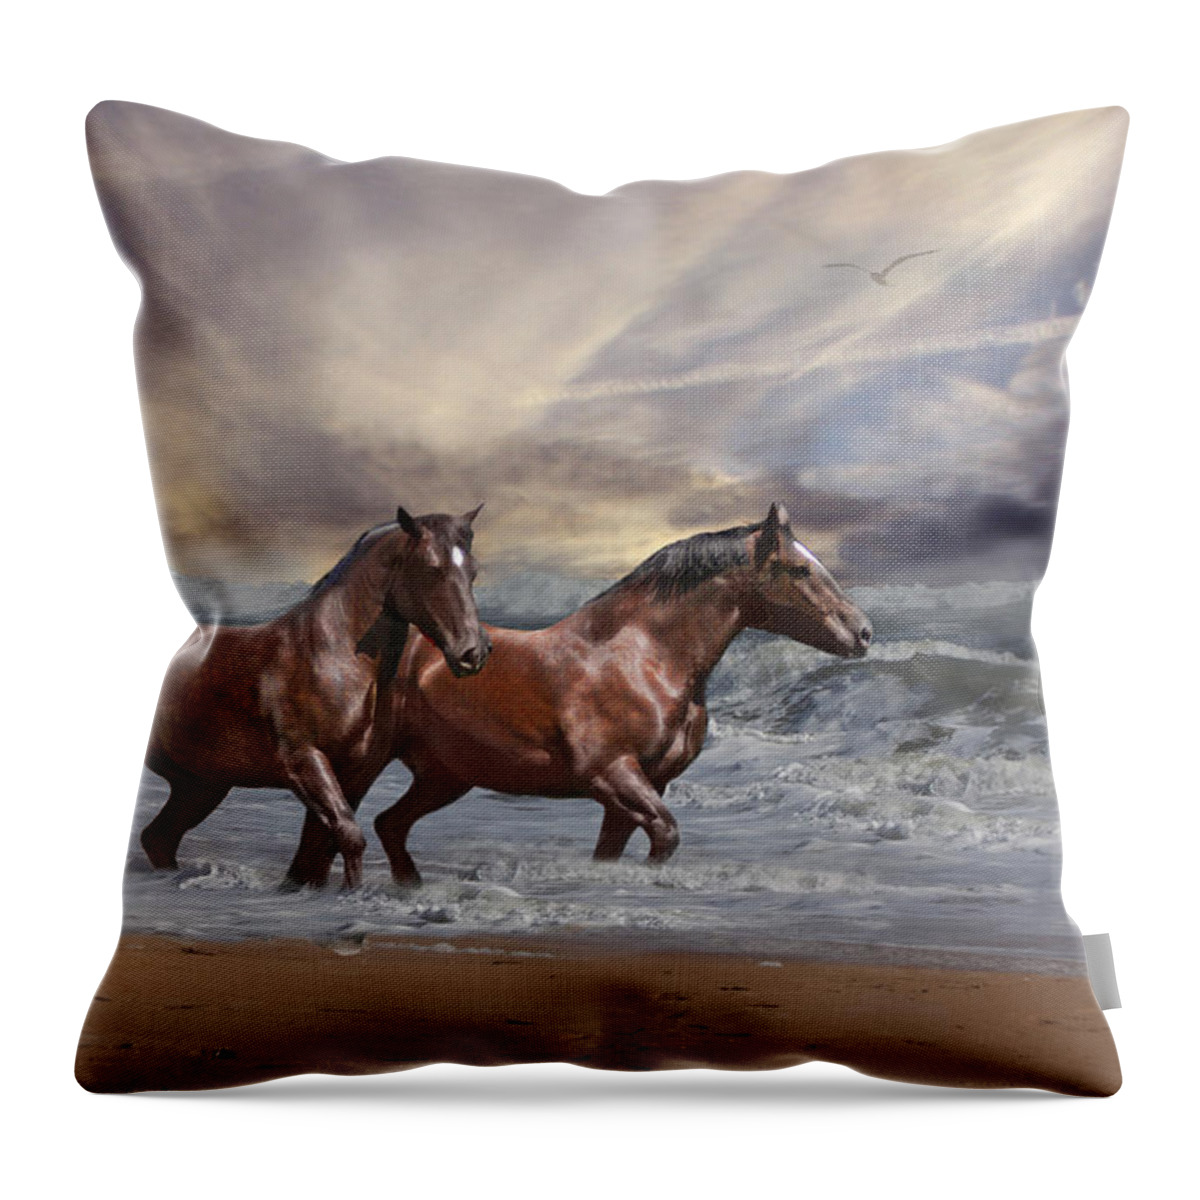 Horse Throw Pillow featuring the photograph Strolling on the Beach by Michele A Loftus